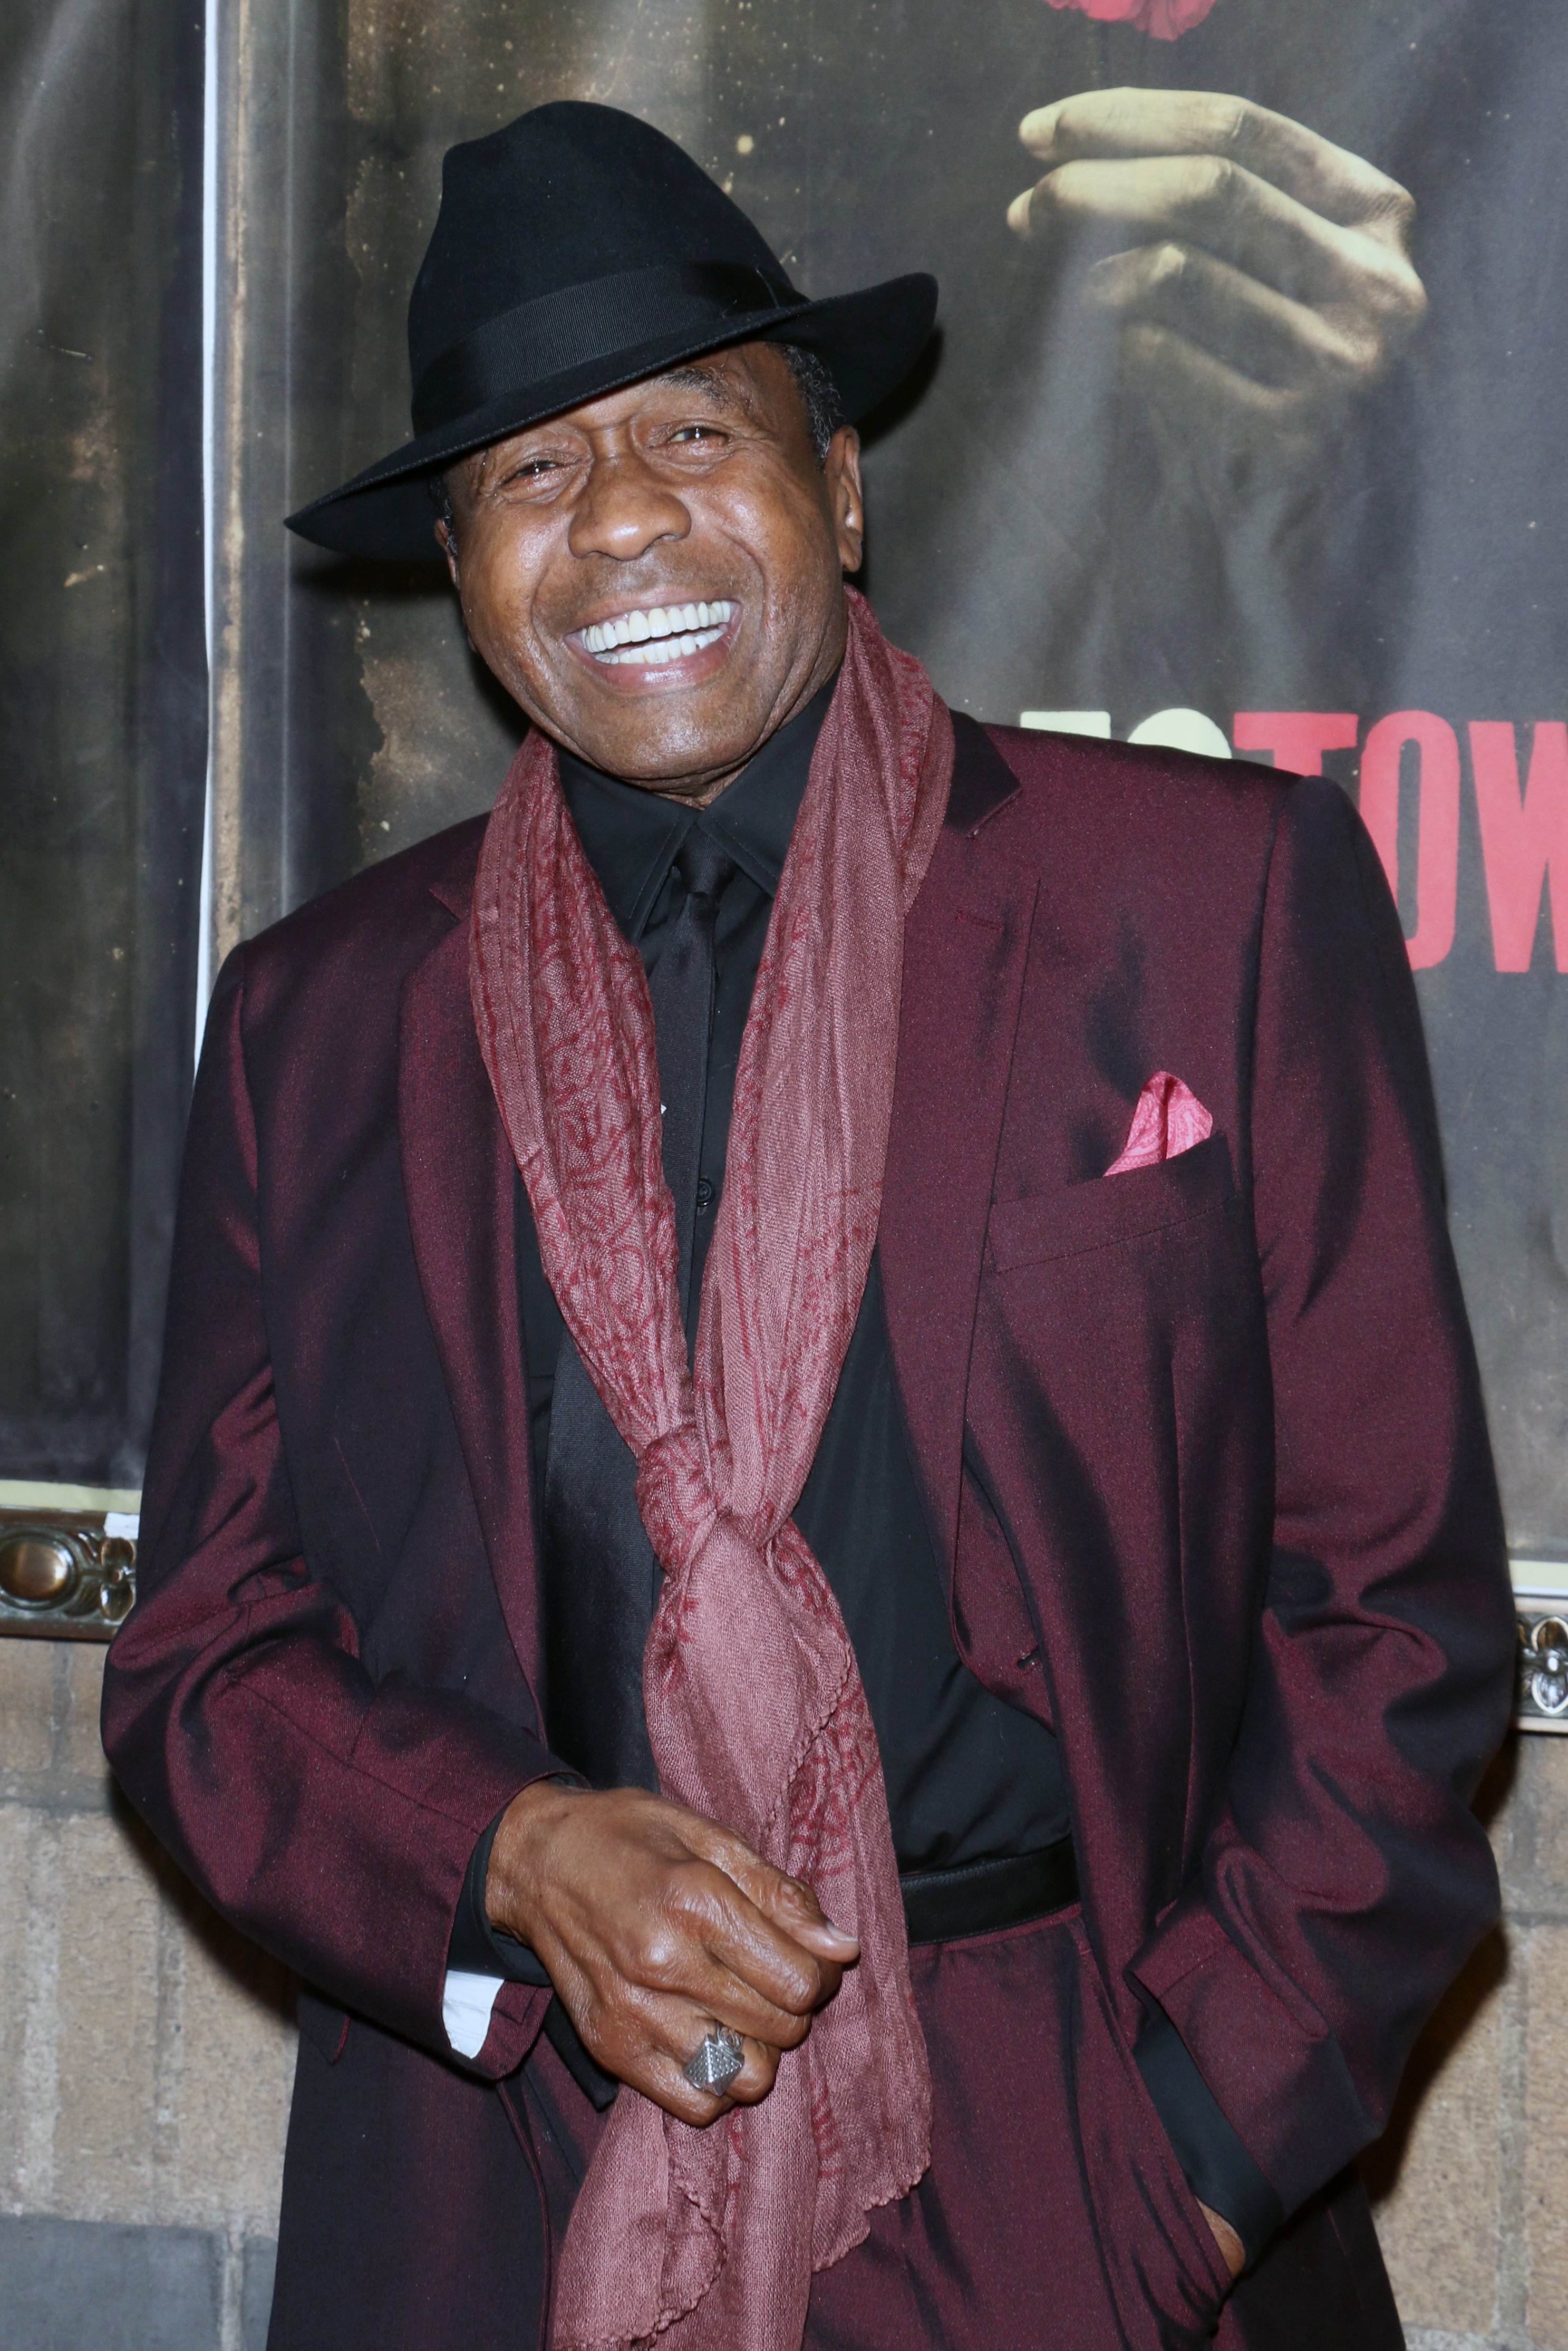 Ben Vereen attends the "Hadestown" on April 17, 2019, in New York City. | Source: Getty Images.